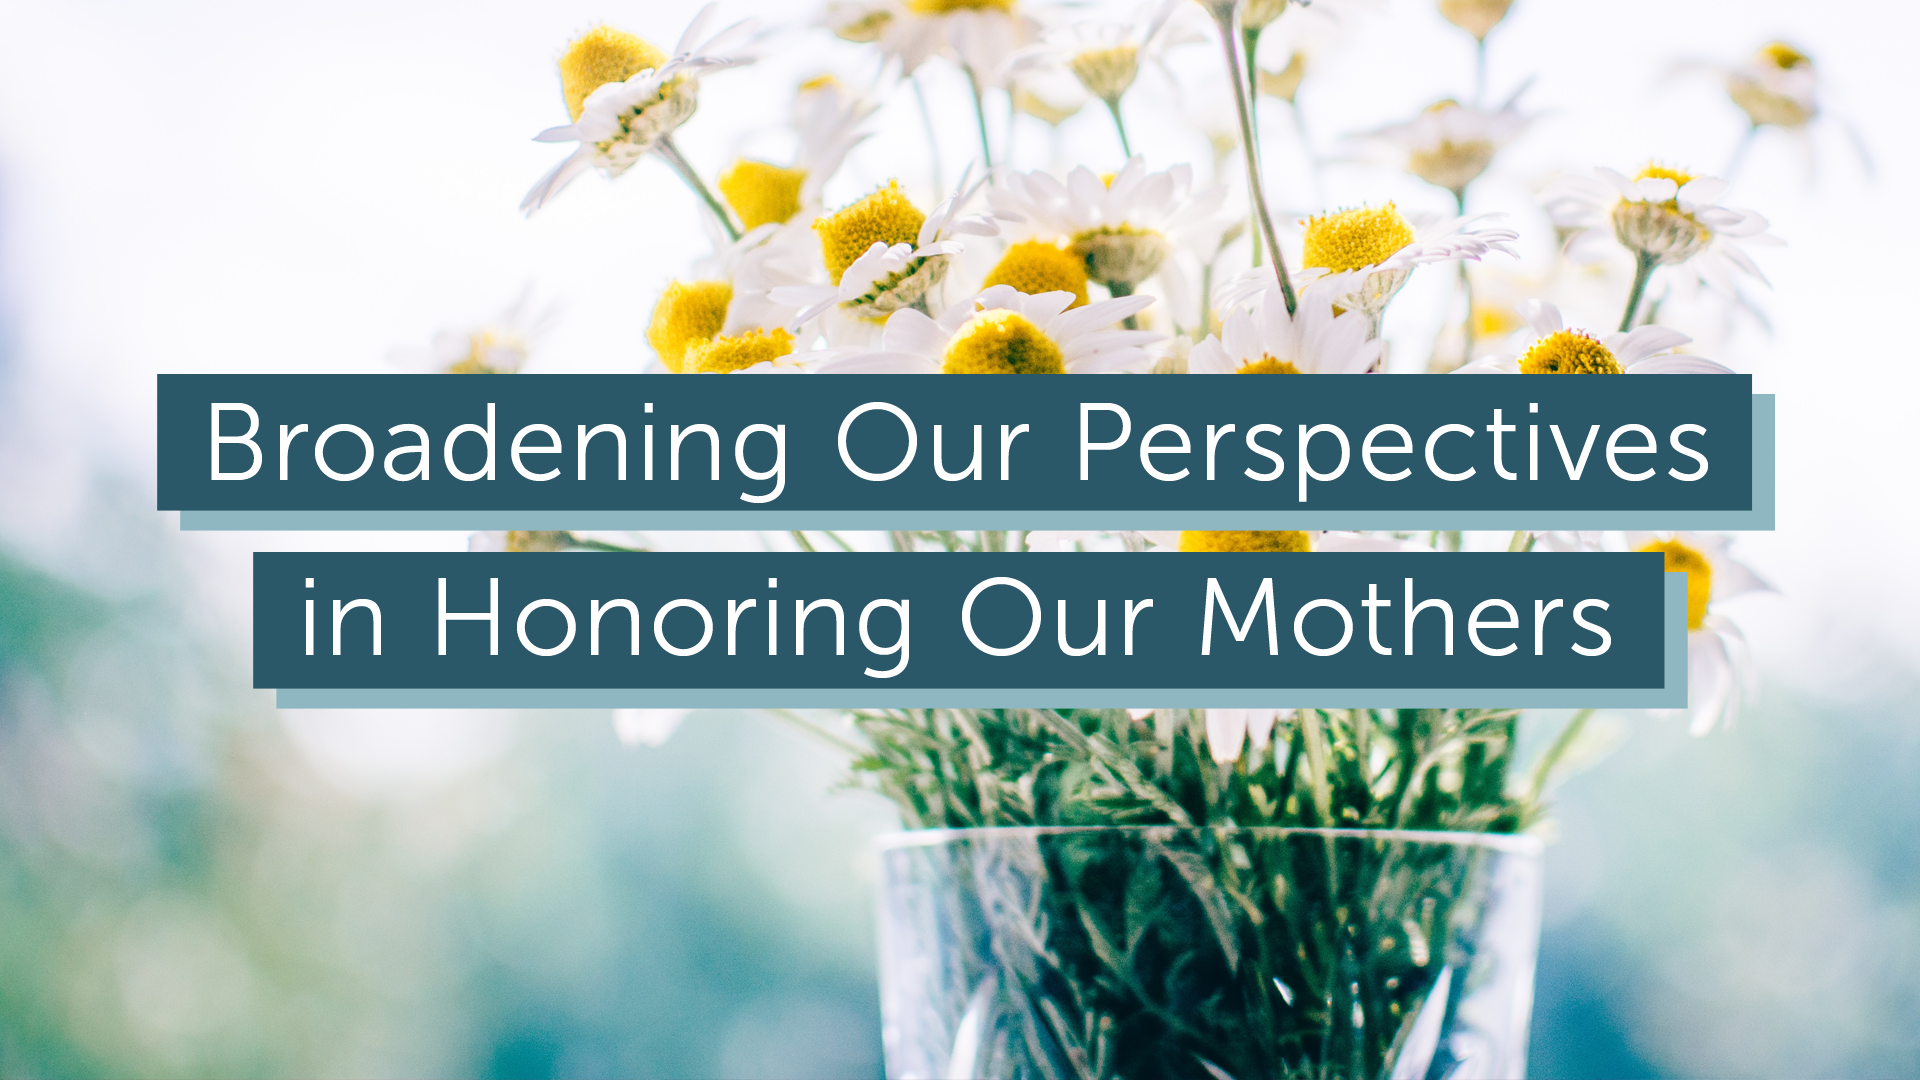 Broadening Our Perspectives in Honoring Our Mothers